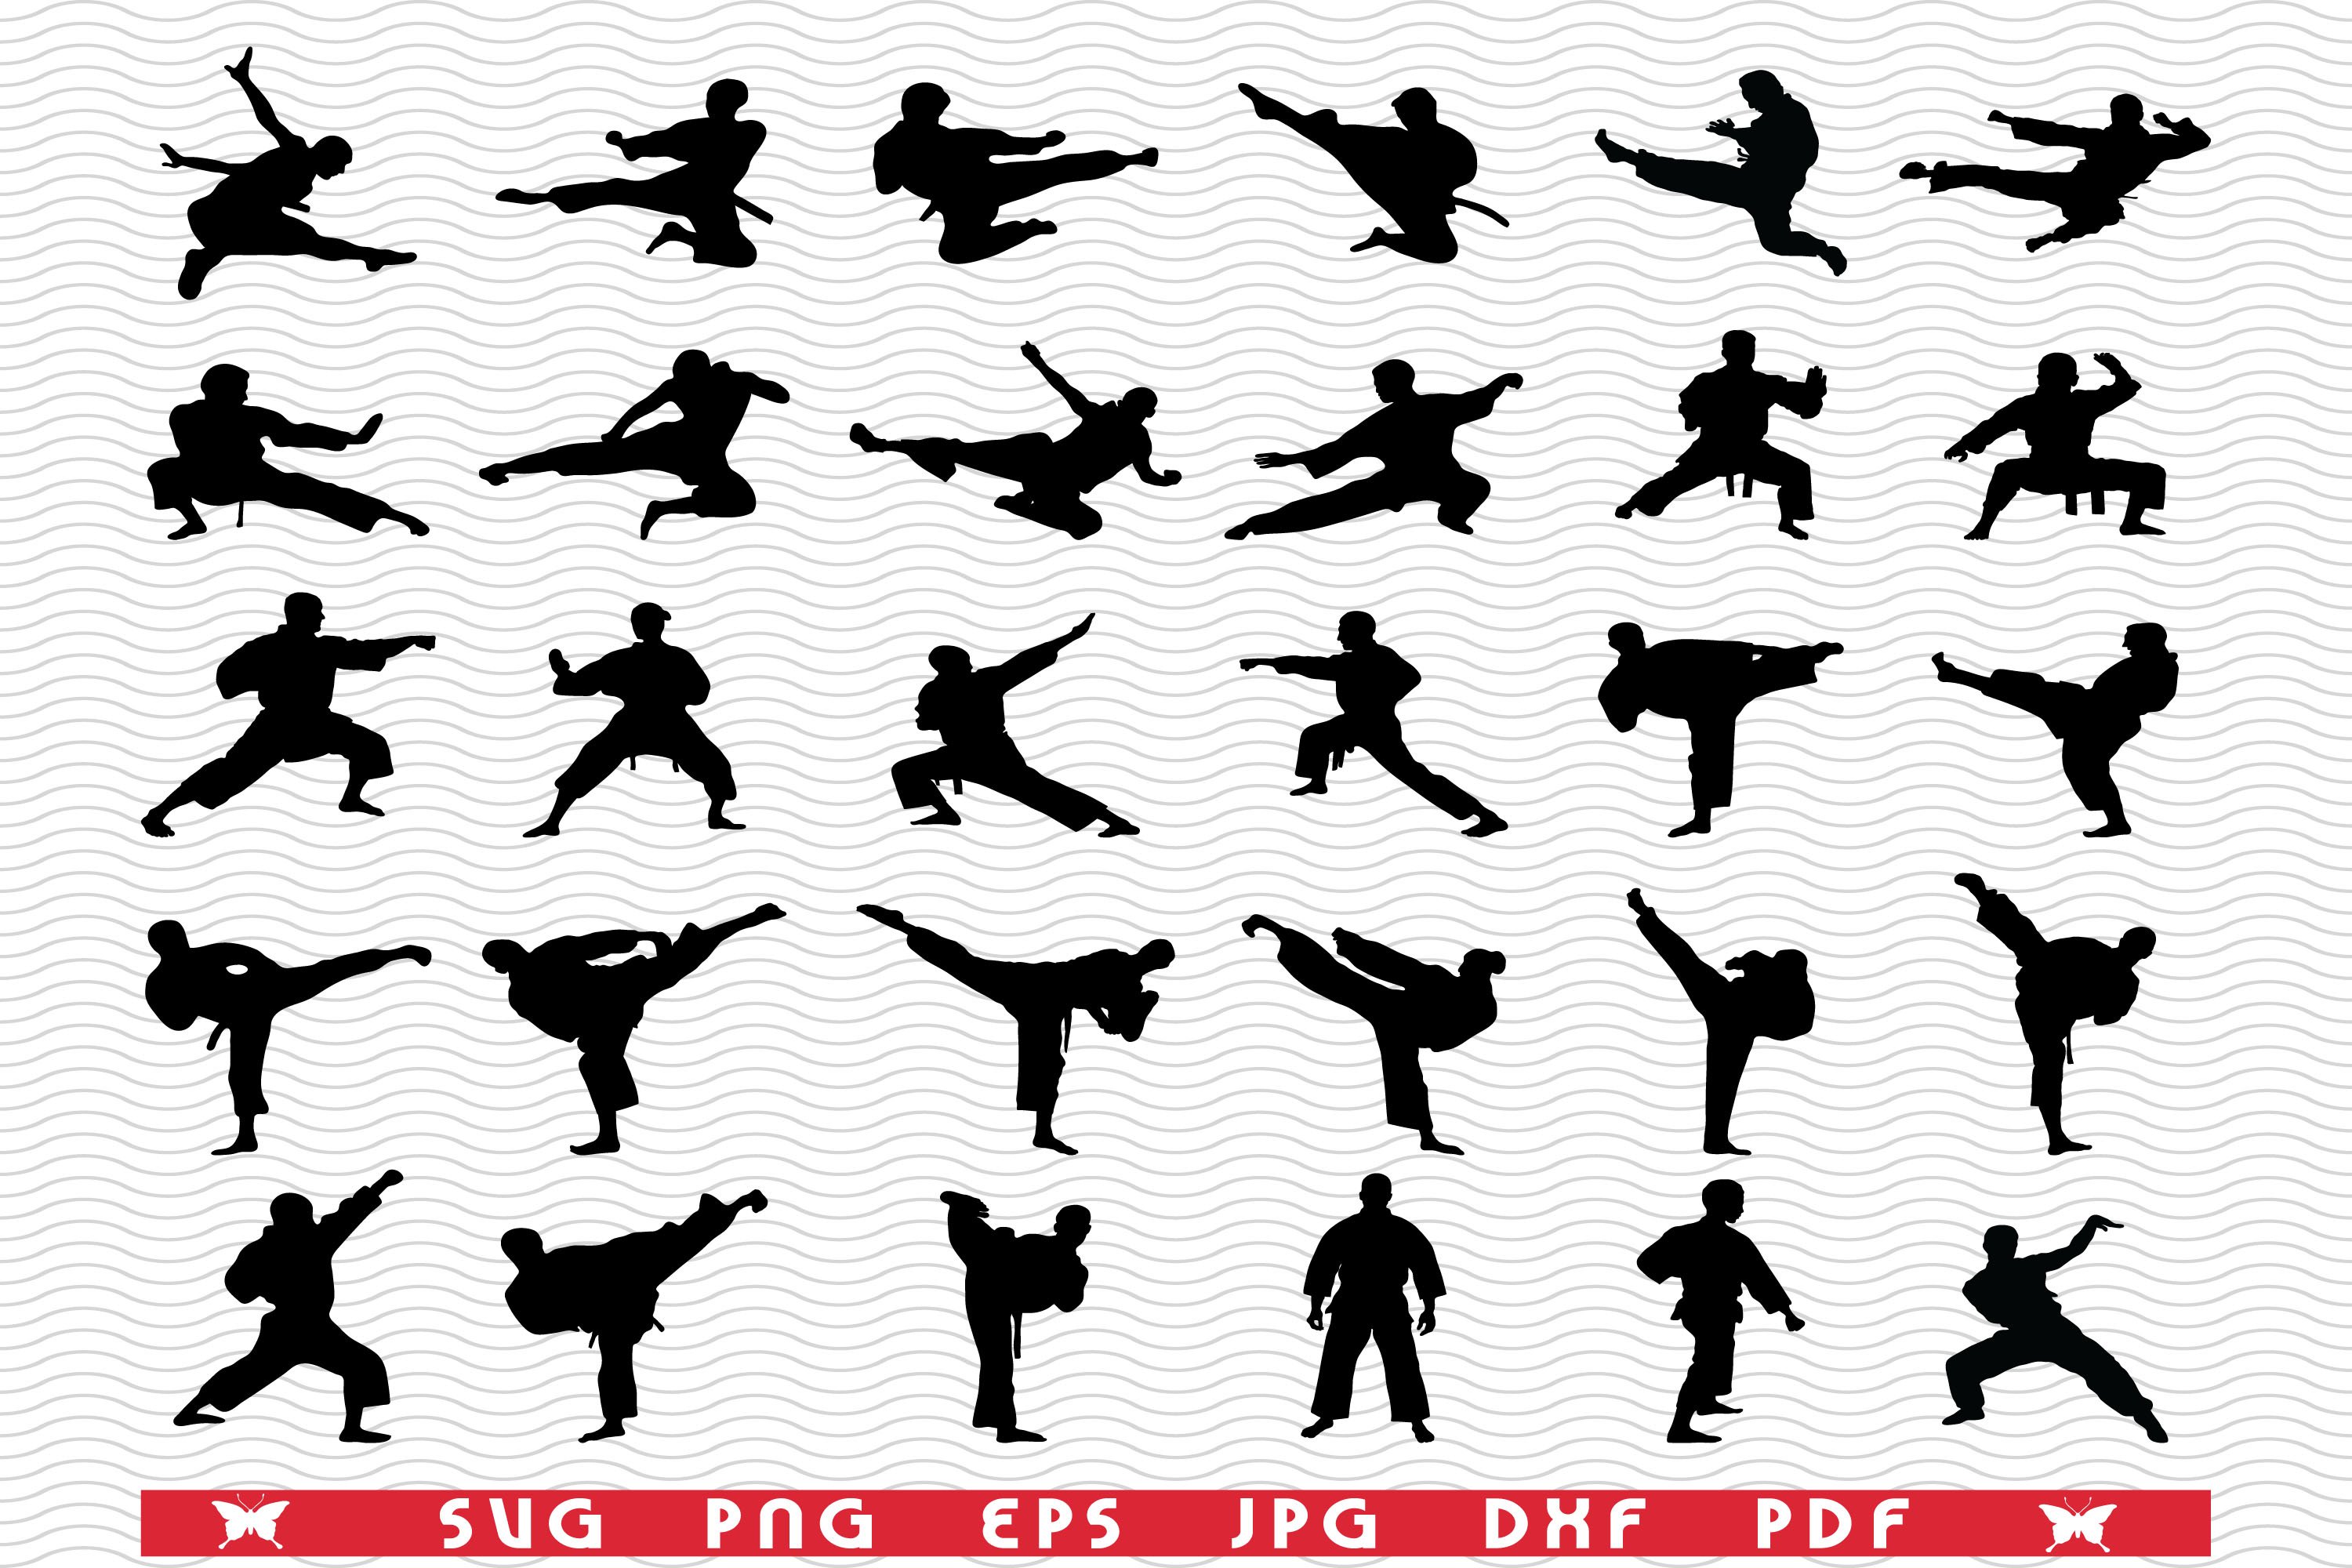 karate punch silhouette